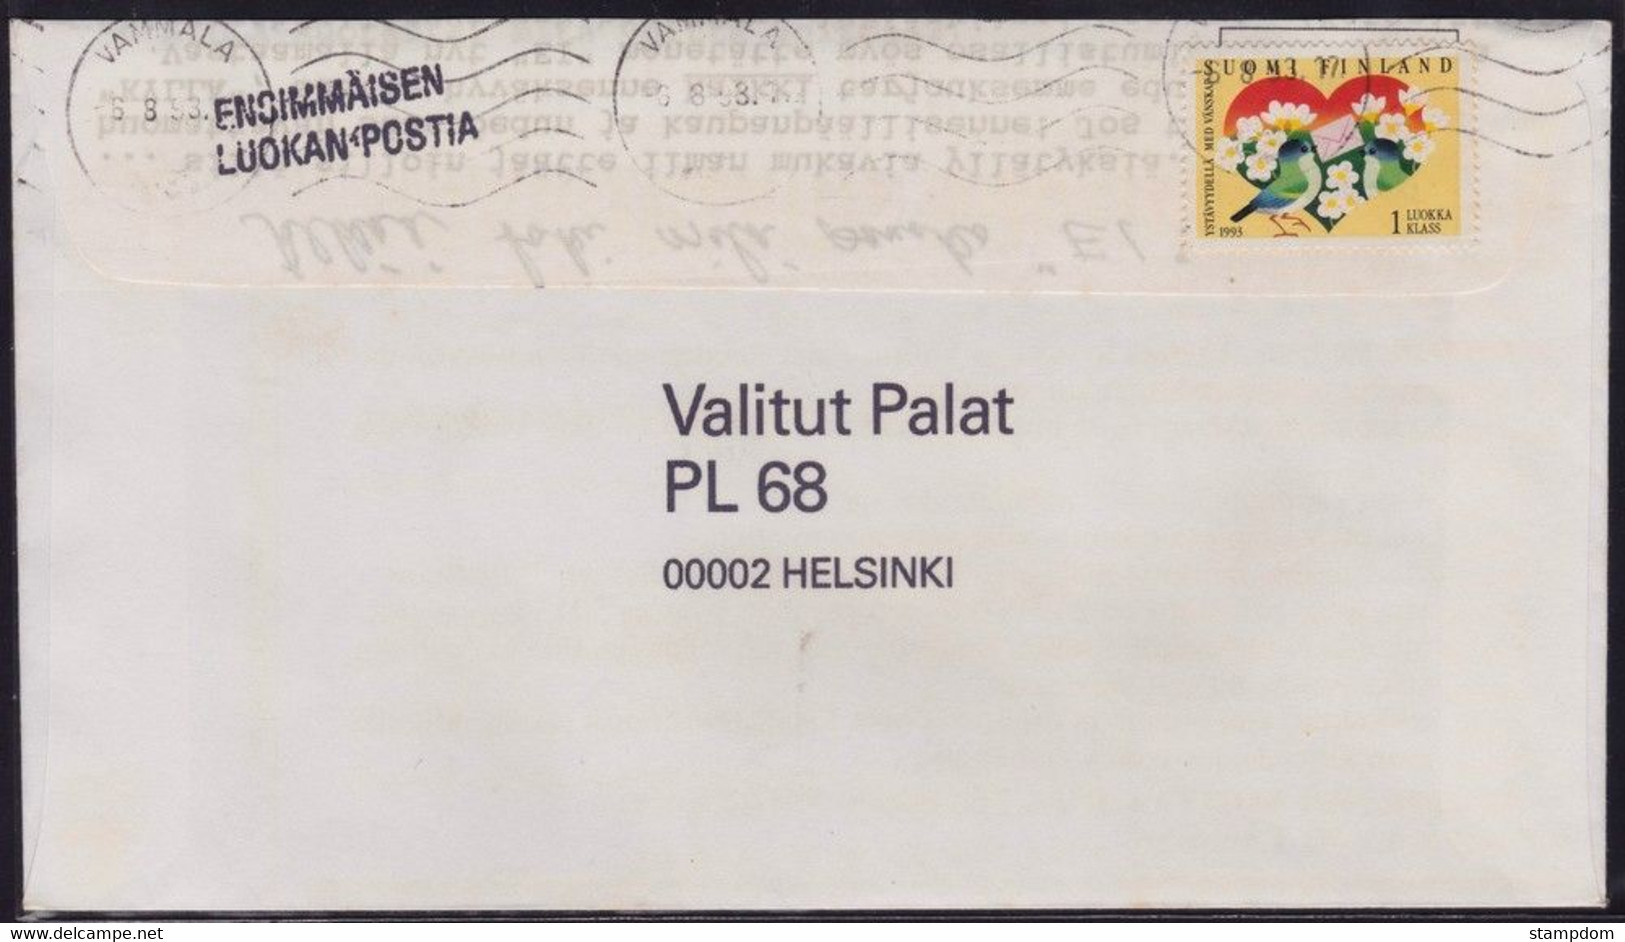 FINLAND 1993 Domestic COVER @D6415 - Covers & Documents